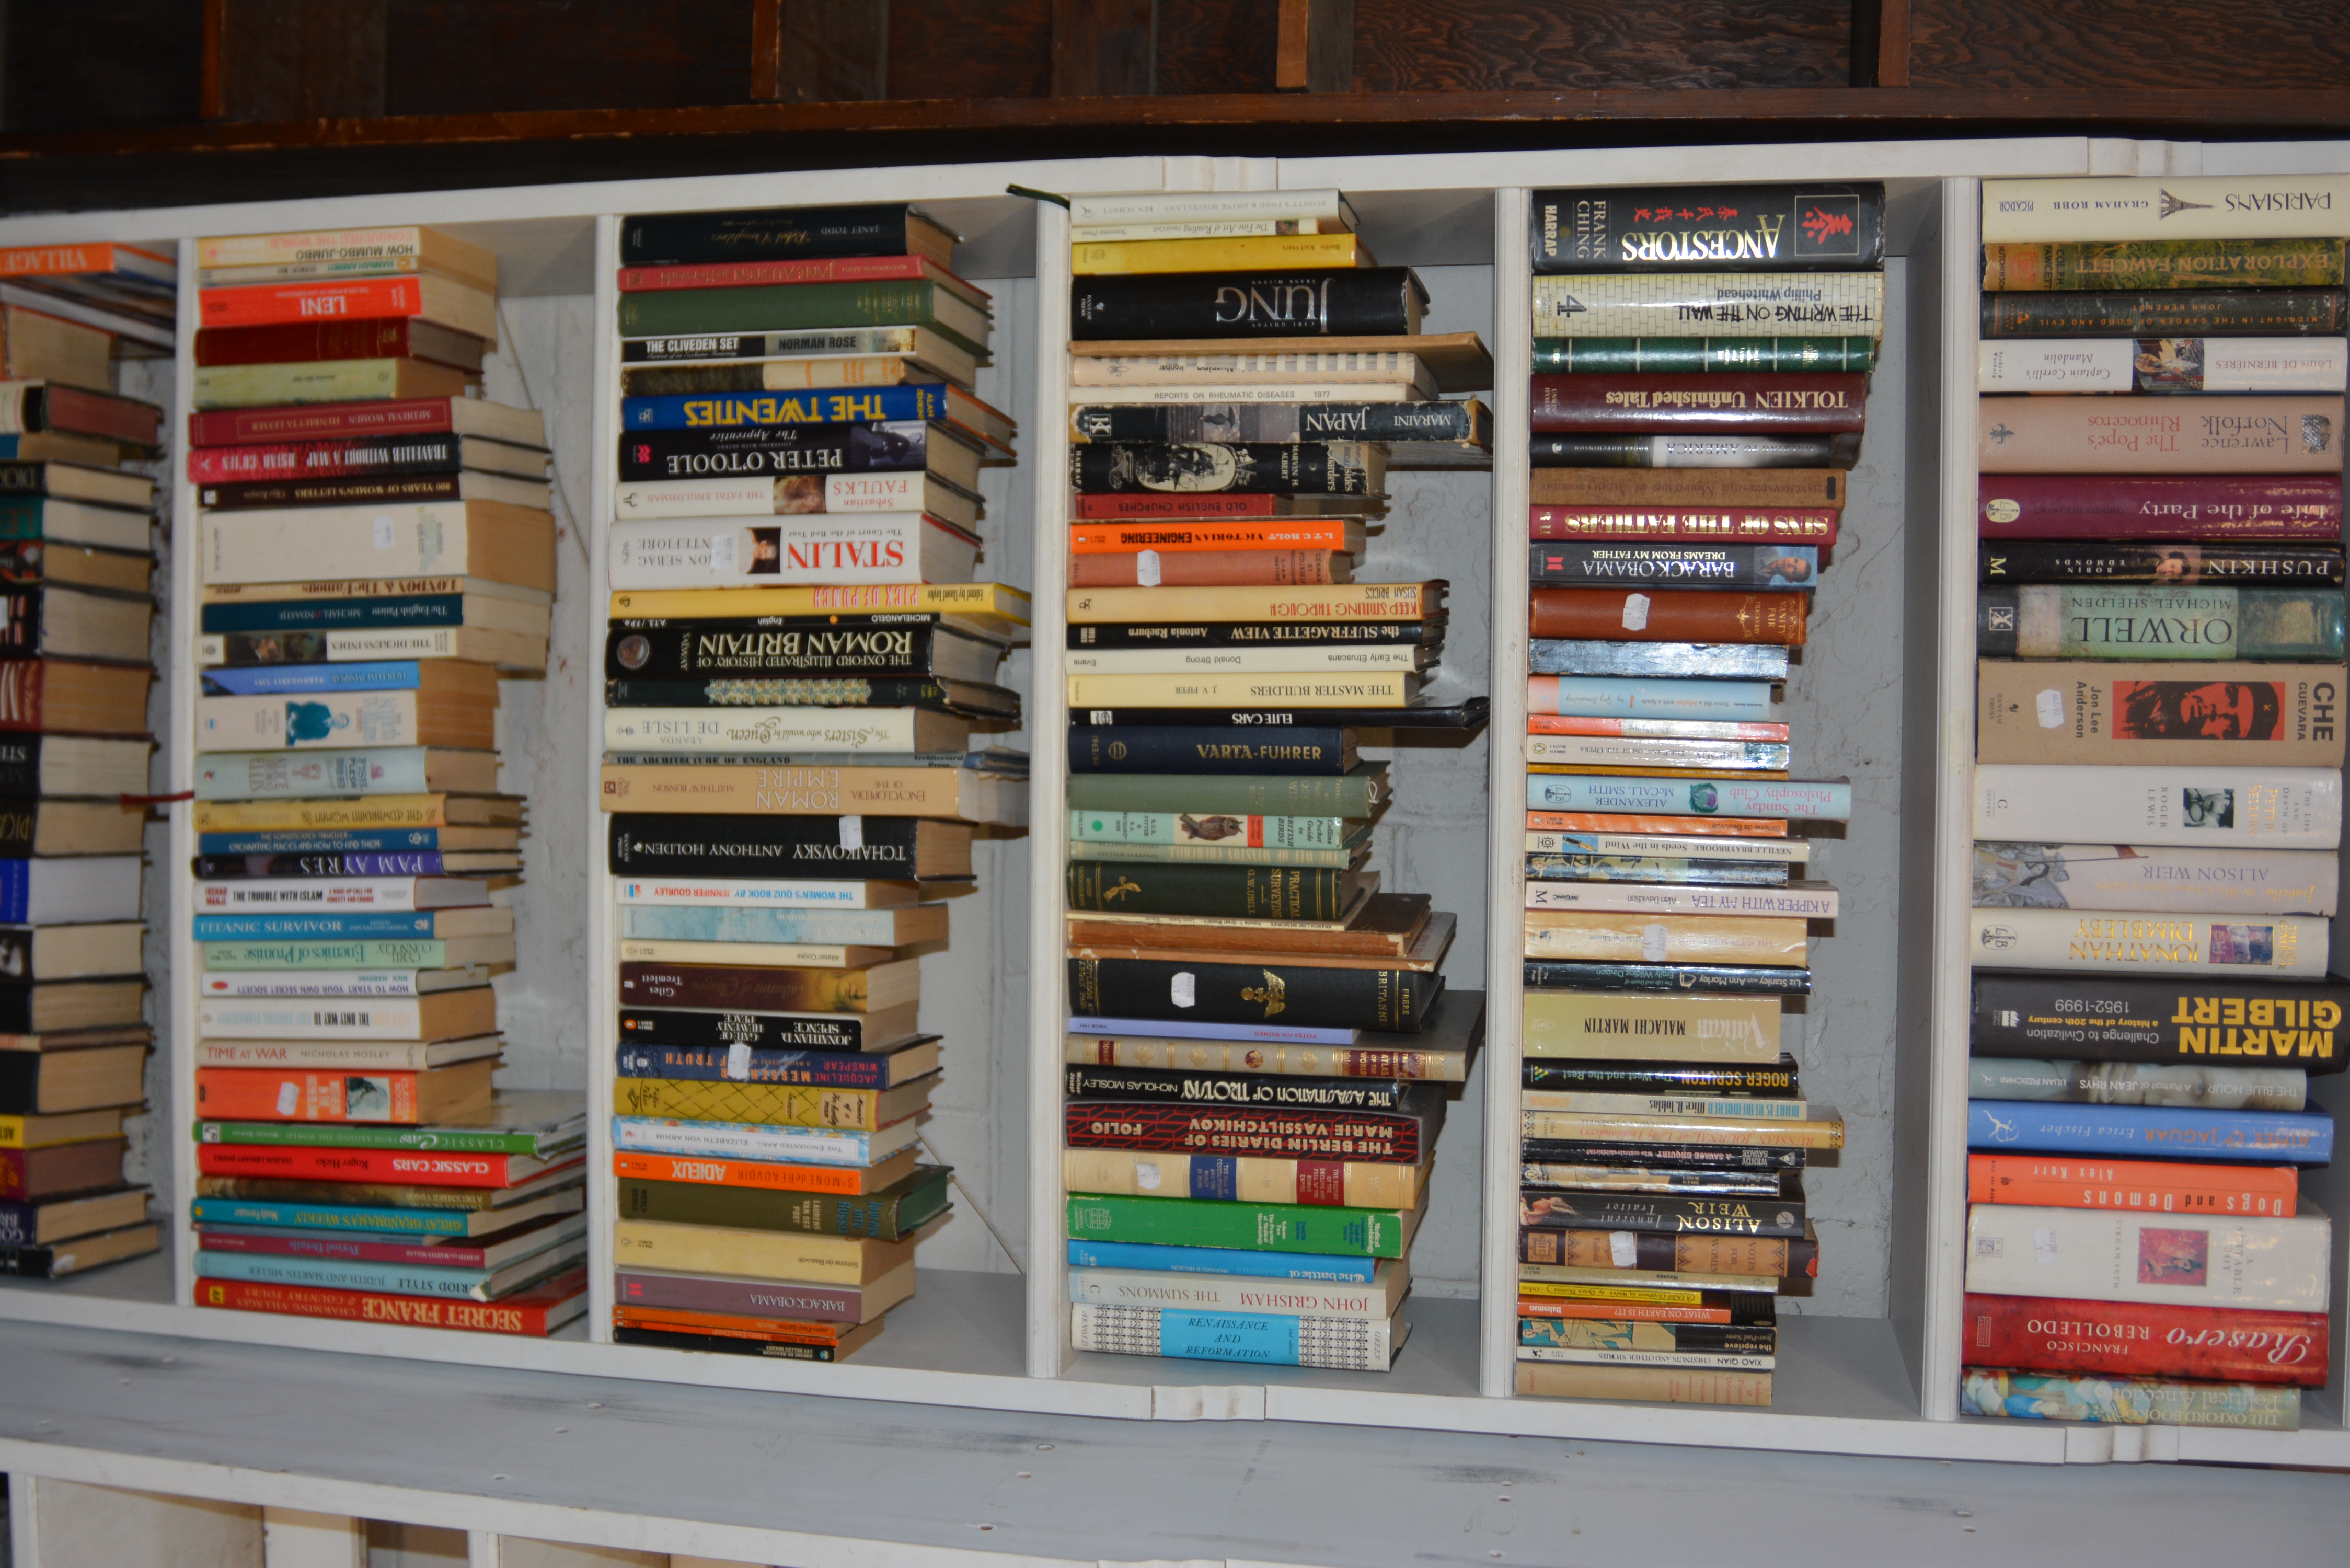 A quantity of assorted books, to include reference books, books on History, Gardening etc (qty)